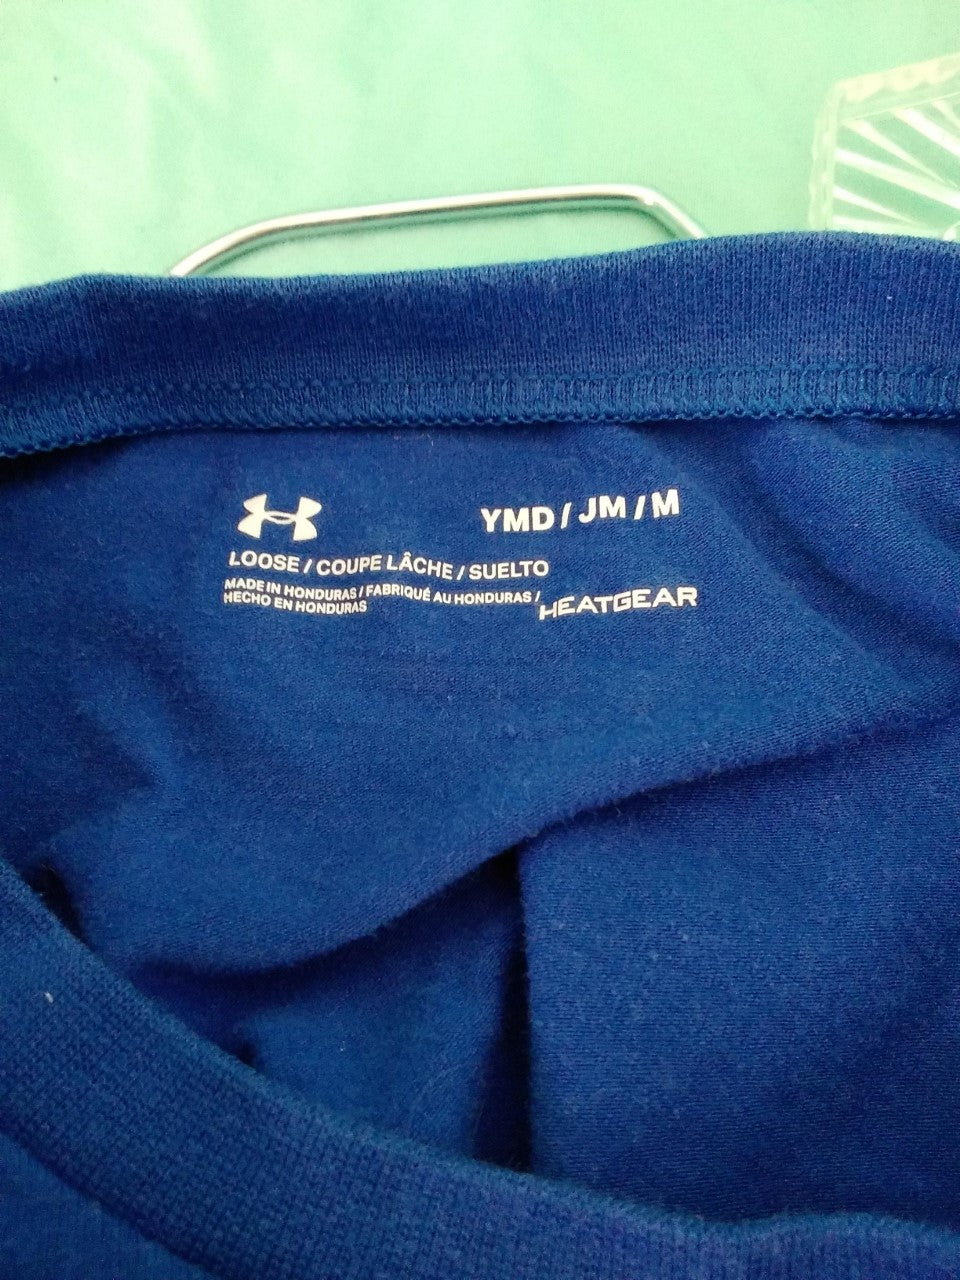 UNDER ARMOUR blue Heatgear Ready For Work Graphic Tee Shirt - Y MD